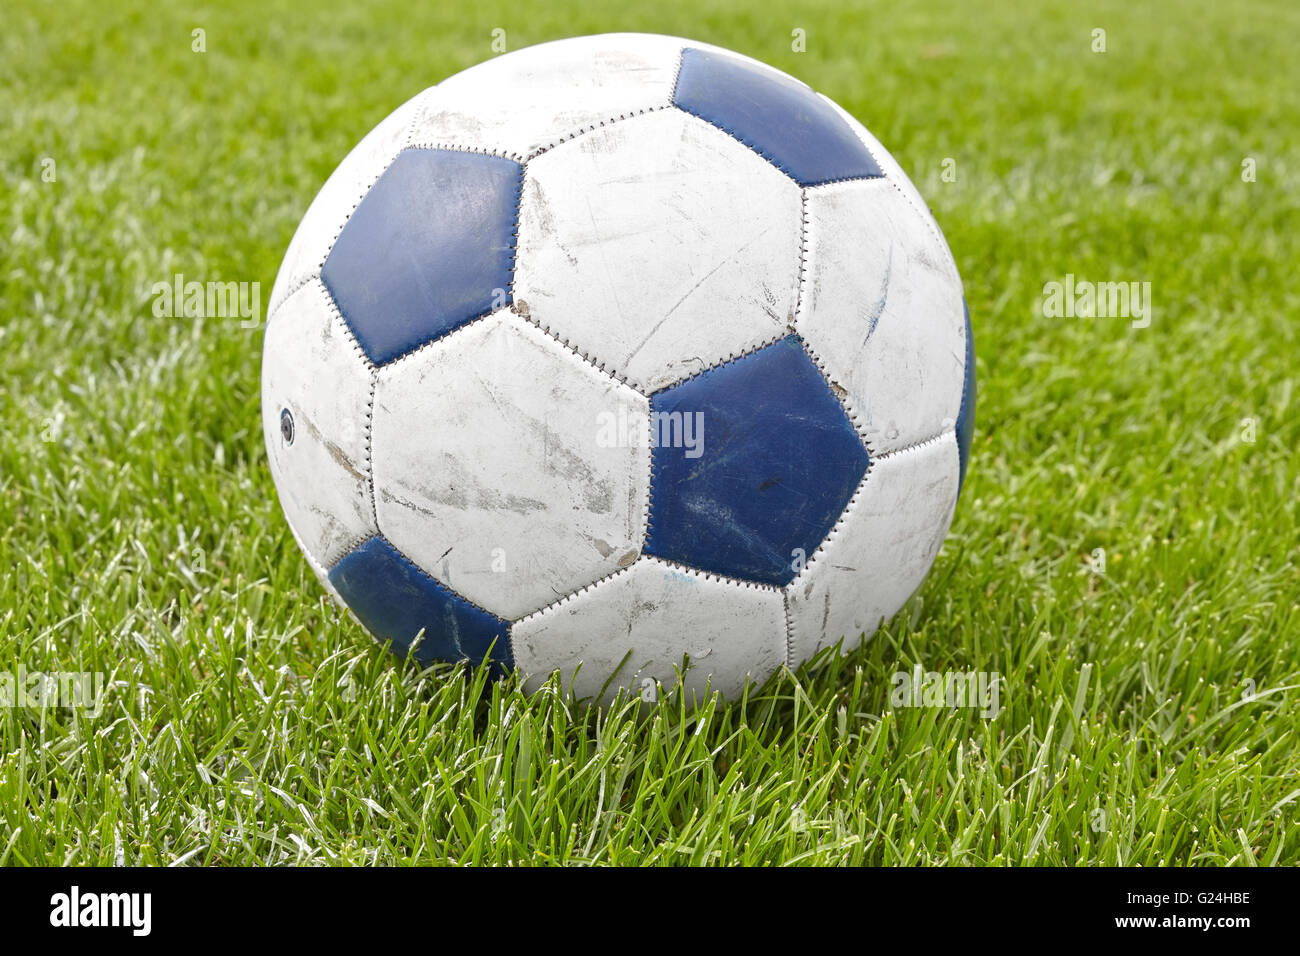 Close up picture of a used leather soccer ball on grass. Stock Photo